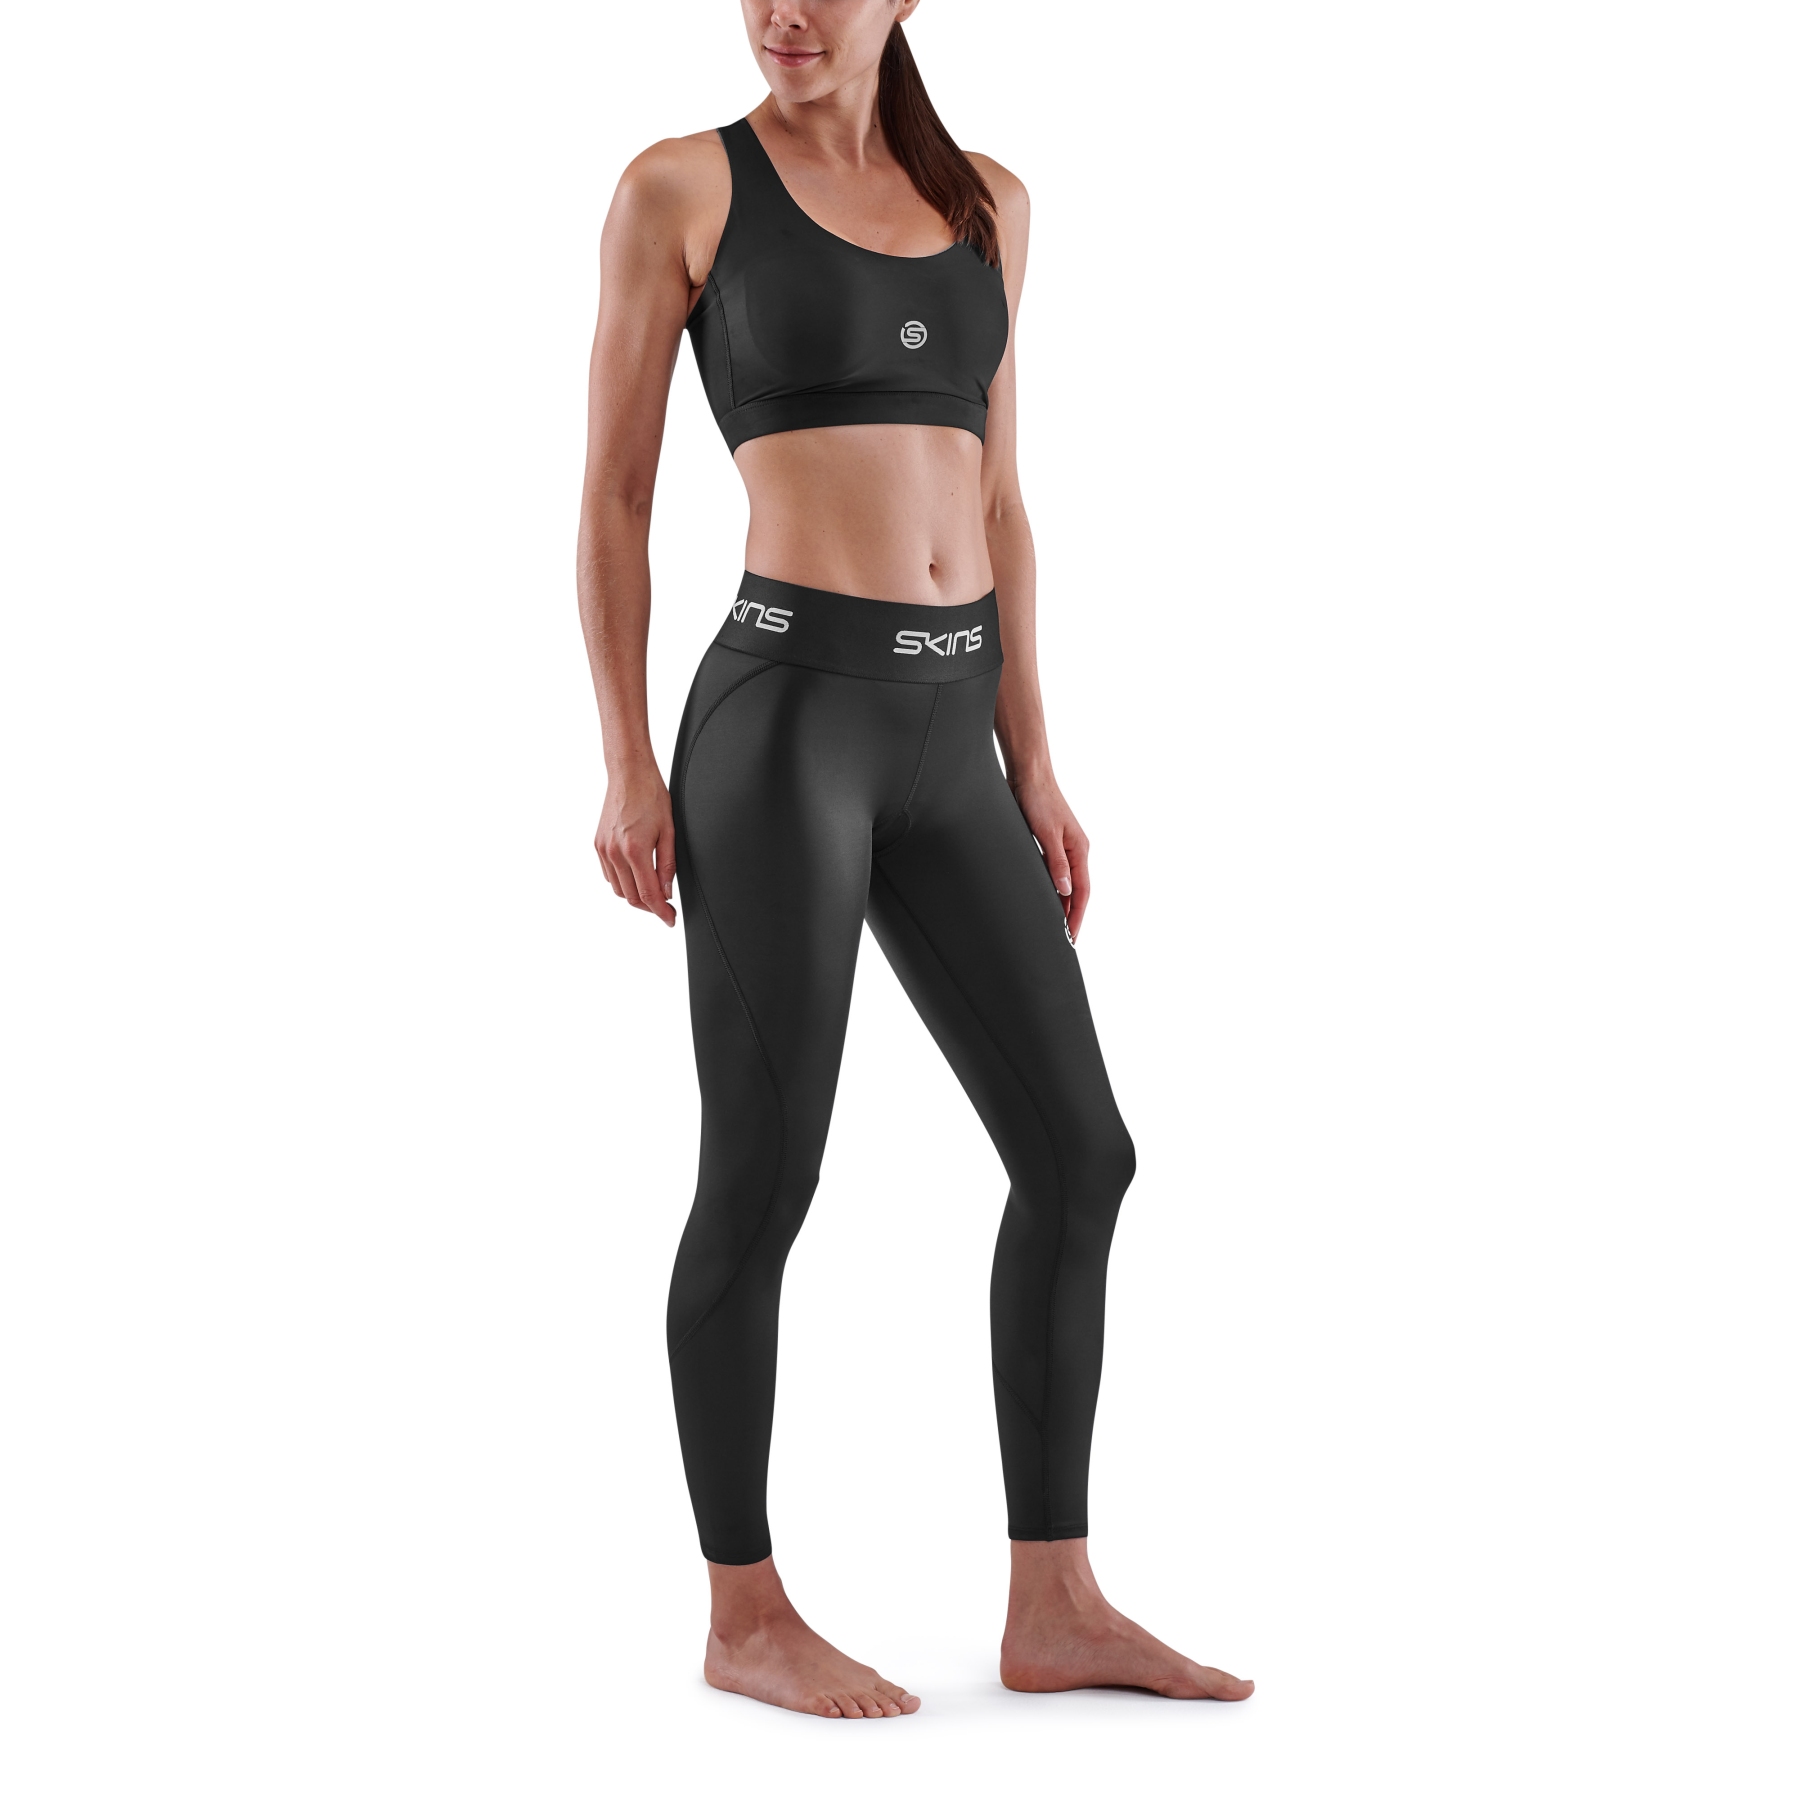 Skins Series 3 Women's 7/8 Tights  Skins compression, Tights, Series 3